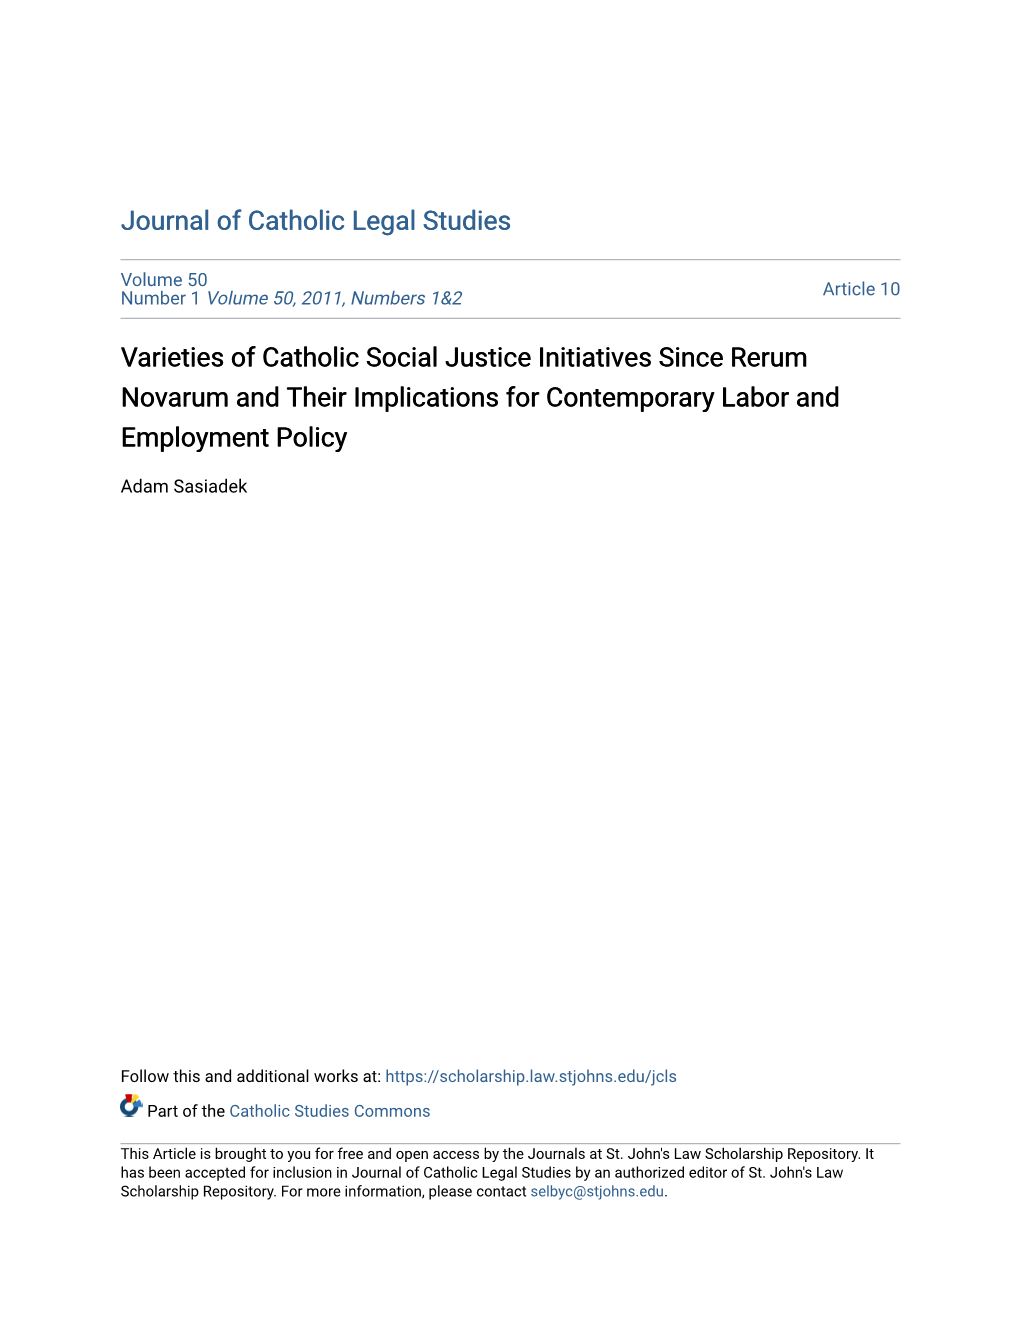 Varieties of Catholic Social Justice Initiatives Since Rerum Novarum and Their Implications for Contemporary Labor and Employment Policy